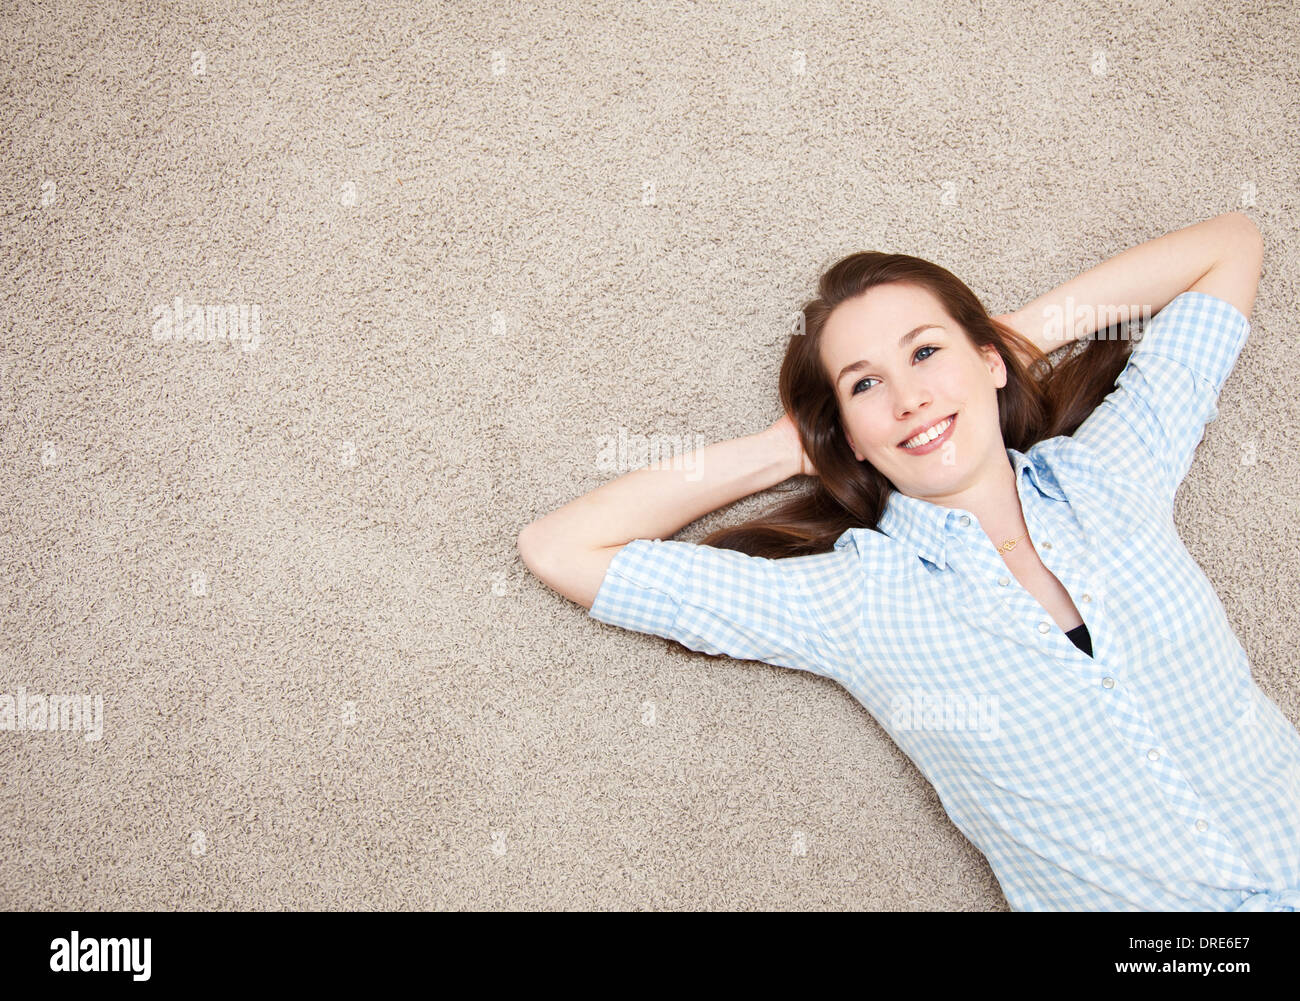 Attractive young woman lying on floor Stock Photo